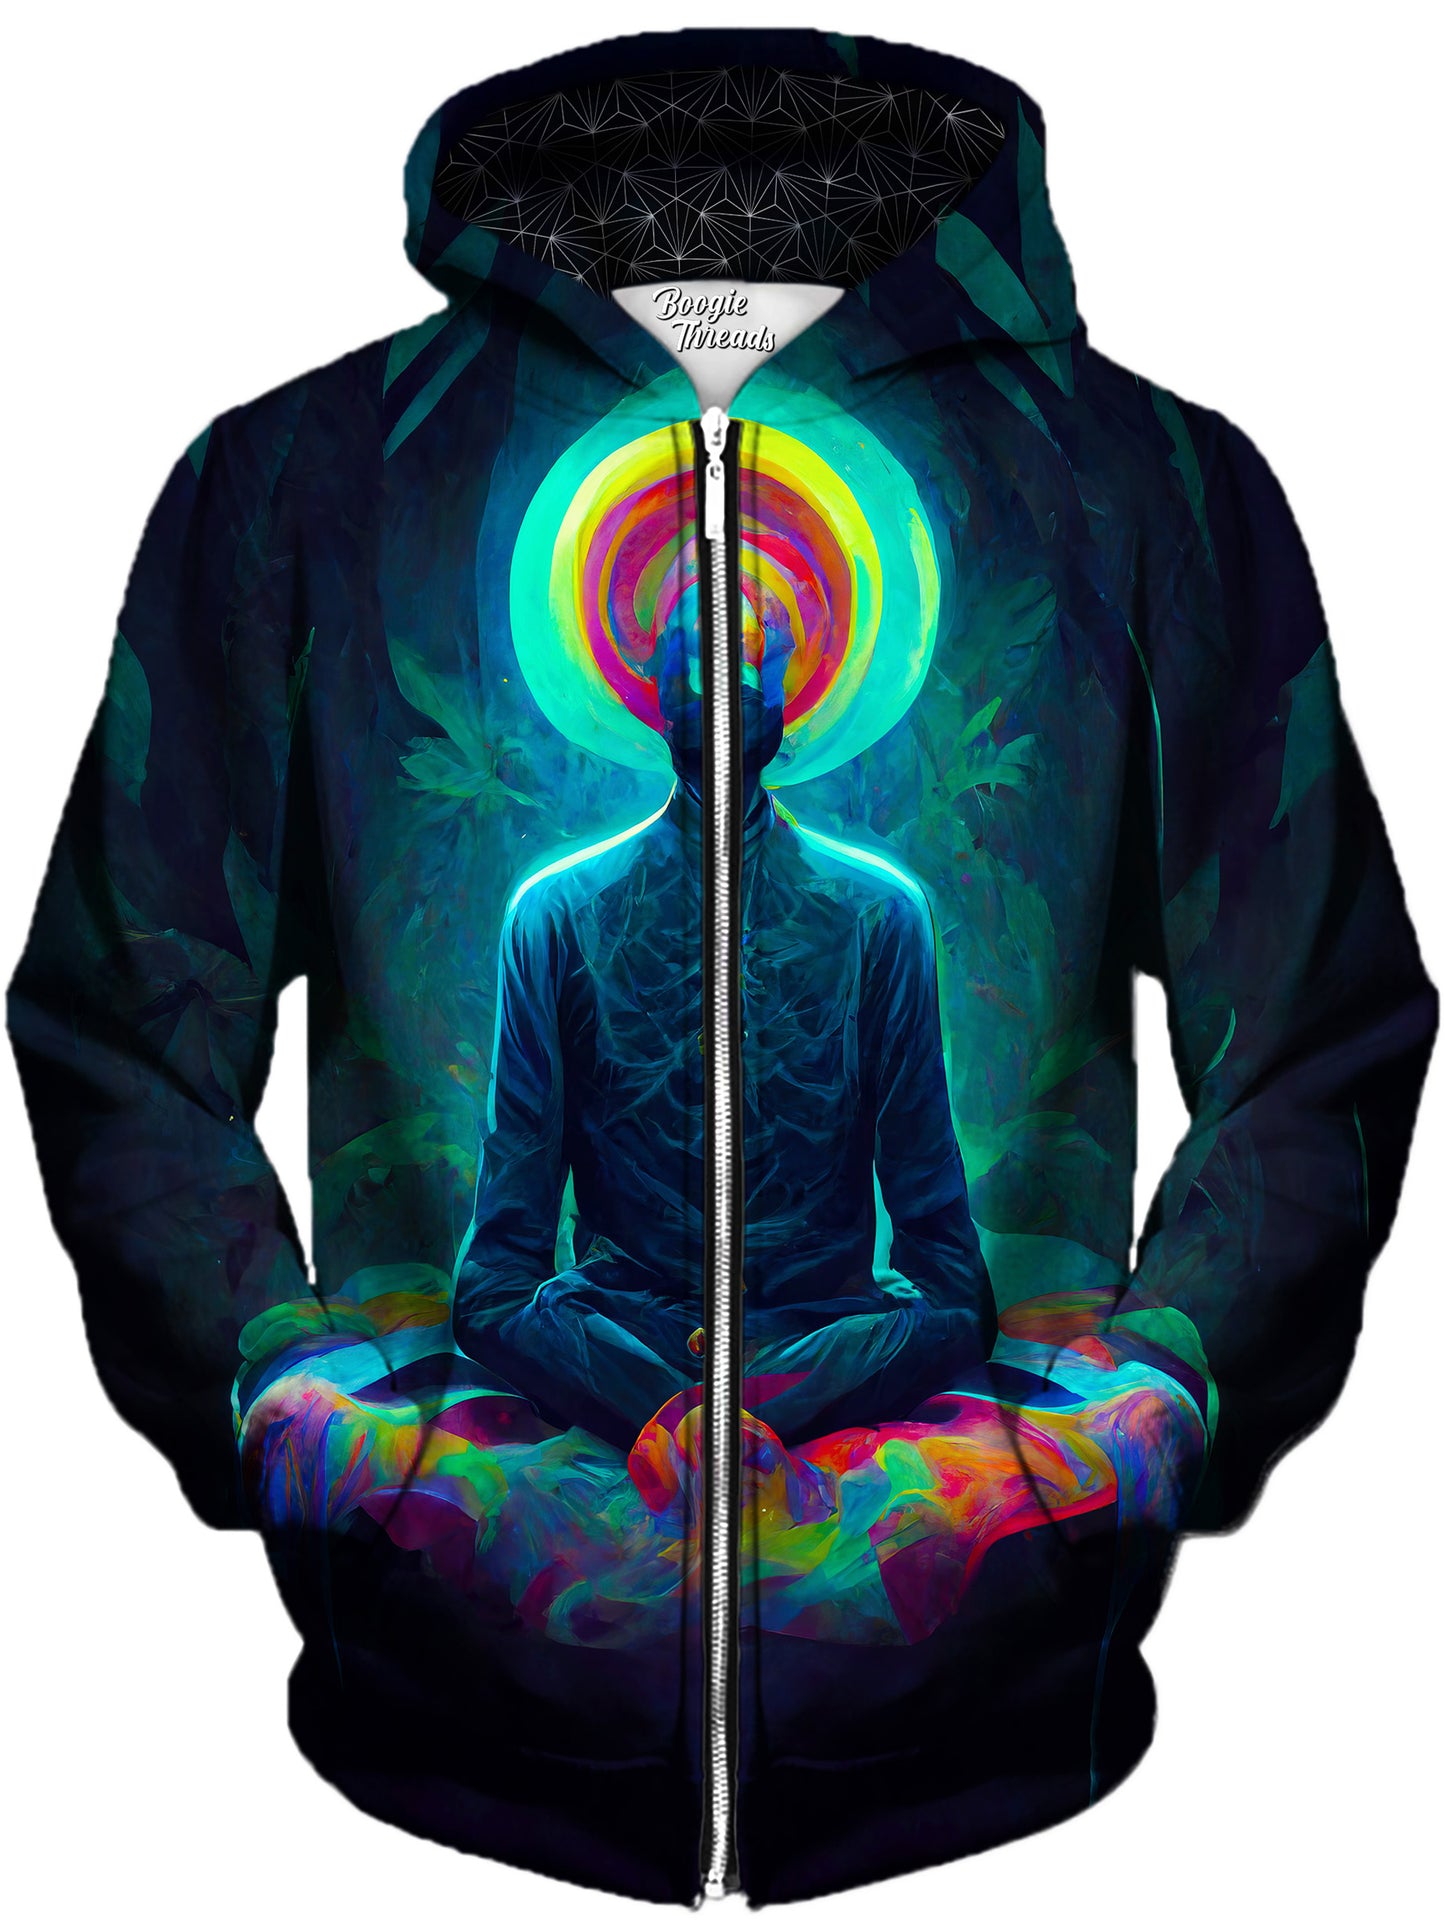 Fronts Of Spirits Unisex Zip-Up Hoodie, Gratefully Dyed, | iEDM